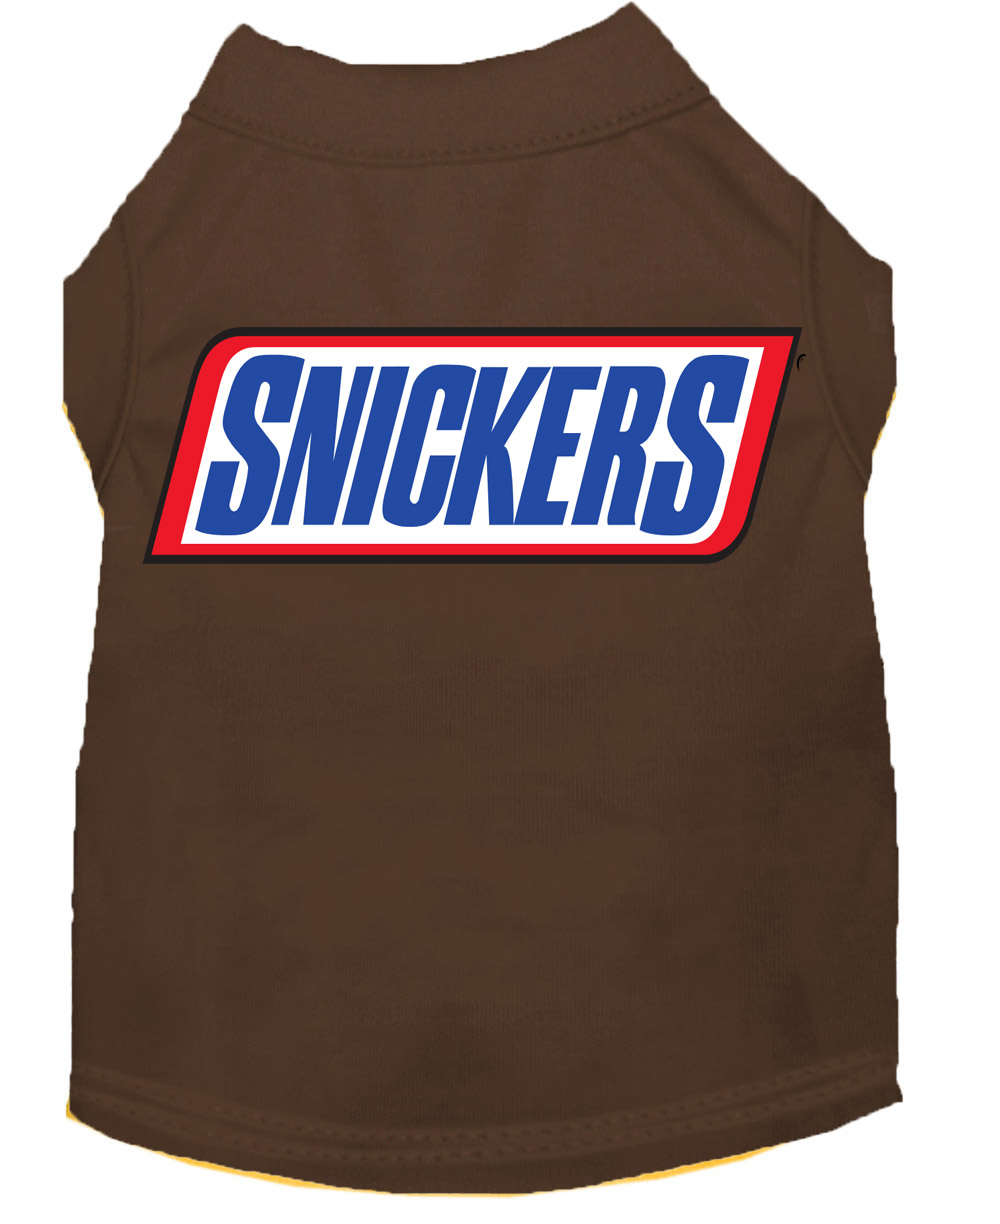 Snickers Inspired Costume Shirt for Dogs